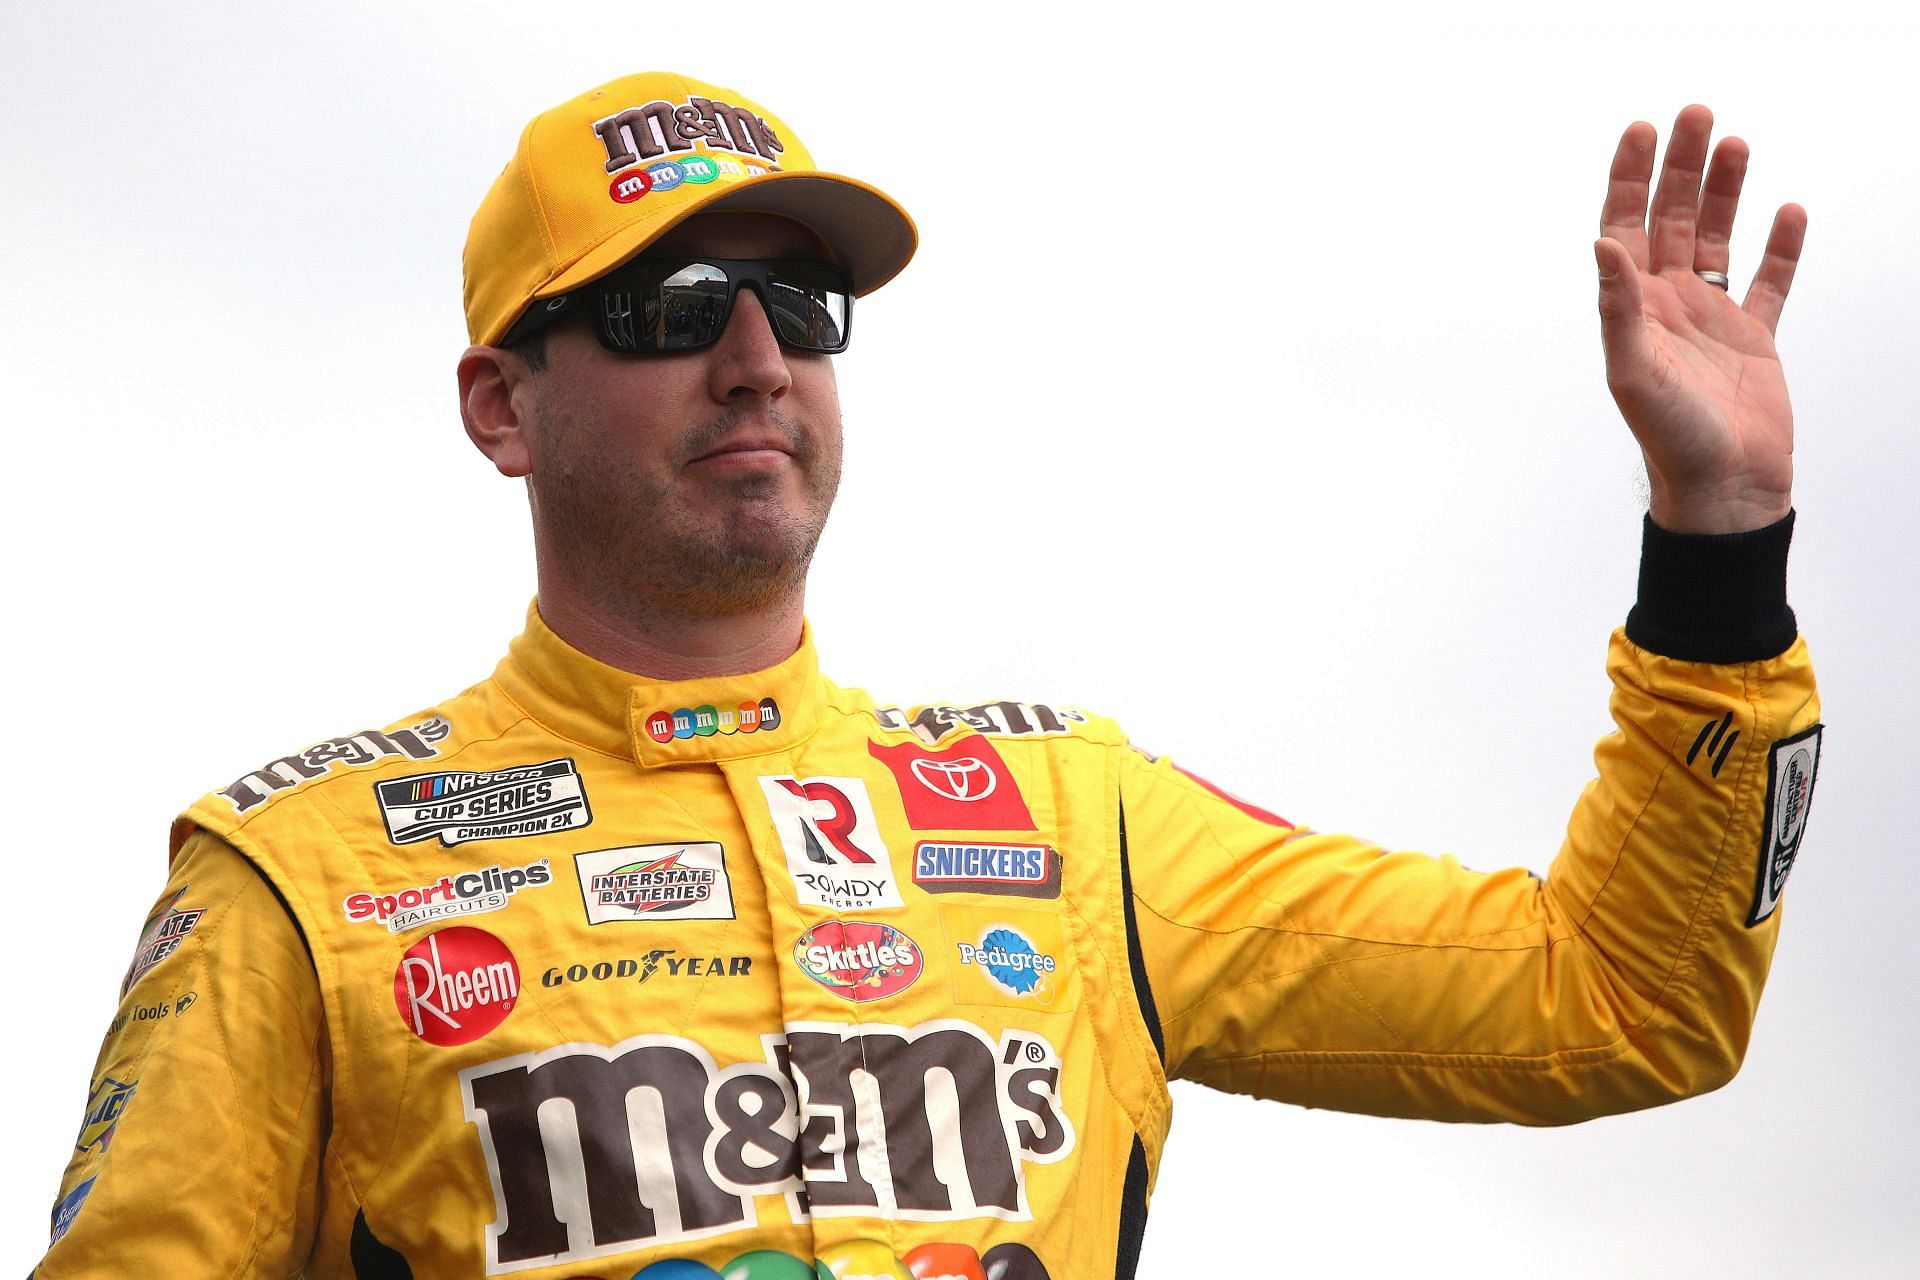 Kyle Busch waves to fans prior to the NASCAR Cup Series Hollywood Casino 400 at Kansas Speedway